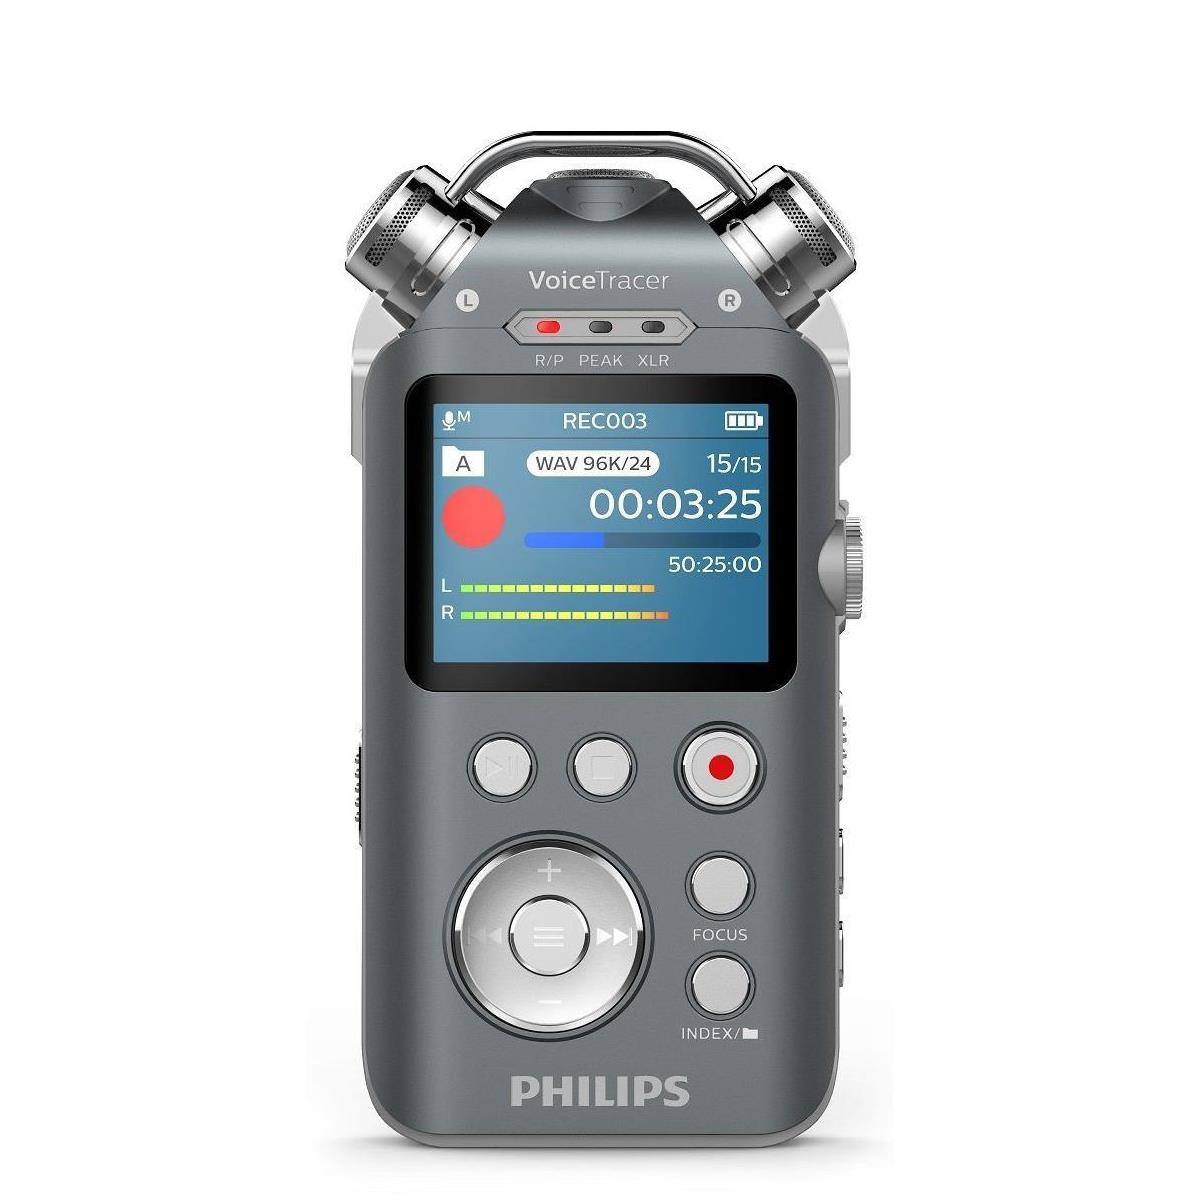 Image of Pag Philips Audio Philips VoiceTracer DVT7500 Audio Recorder